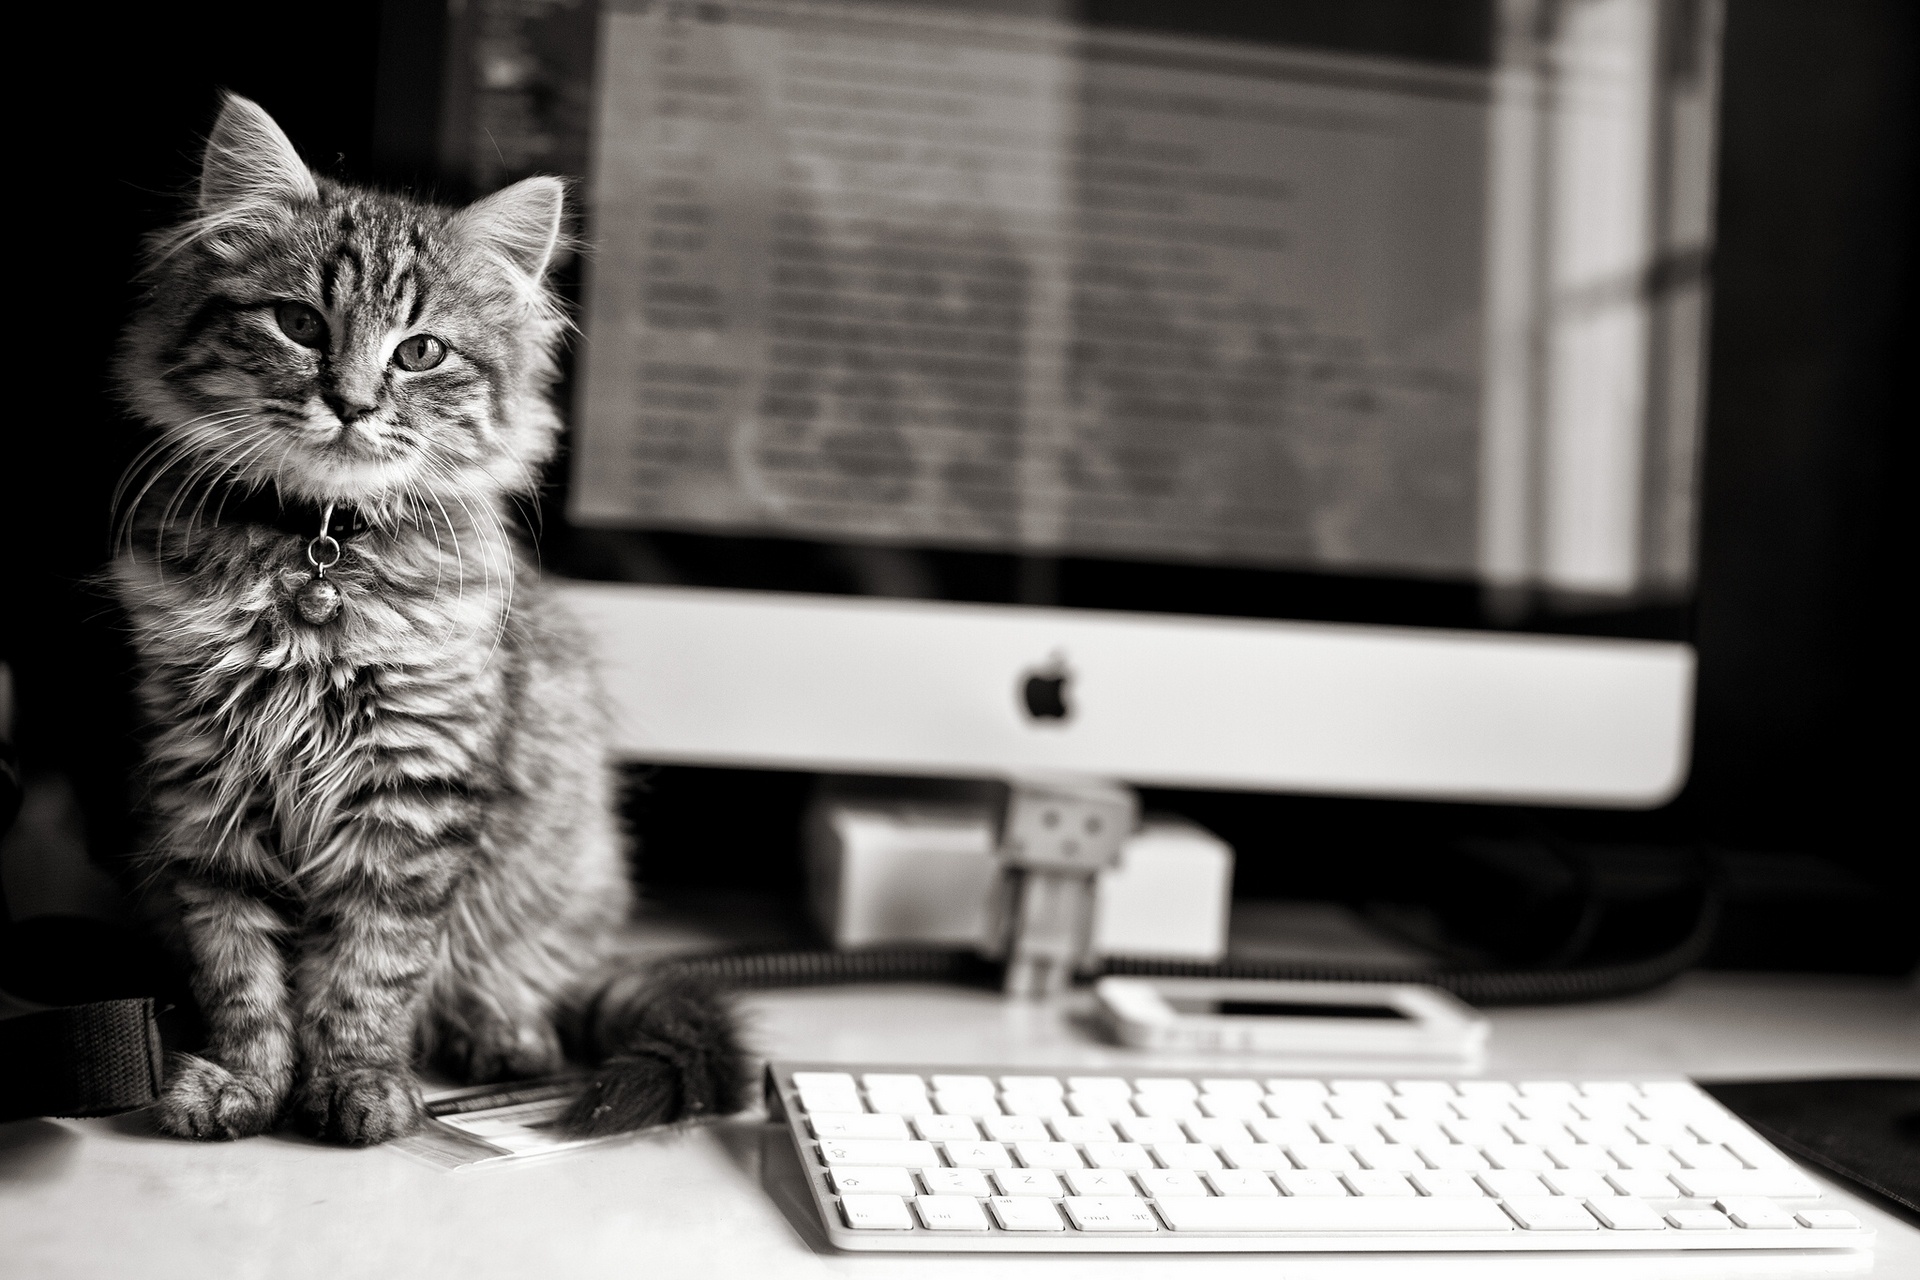 A kitten sits by a computer in a monochrome photo